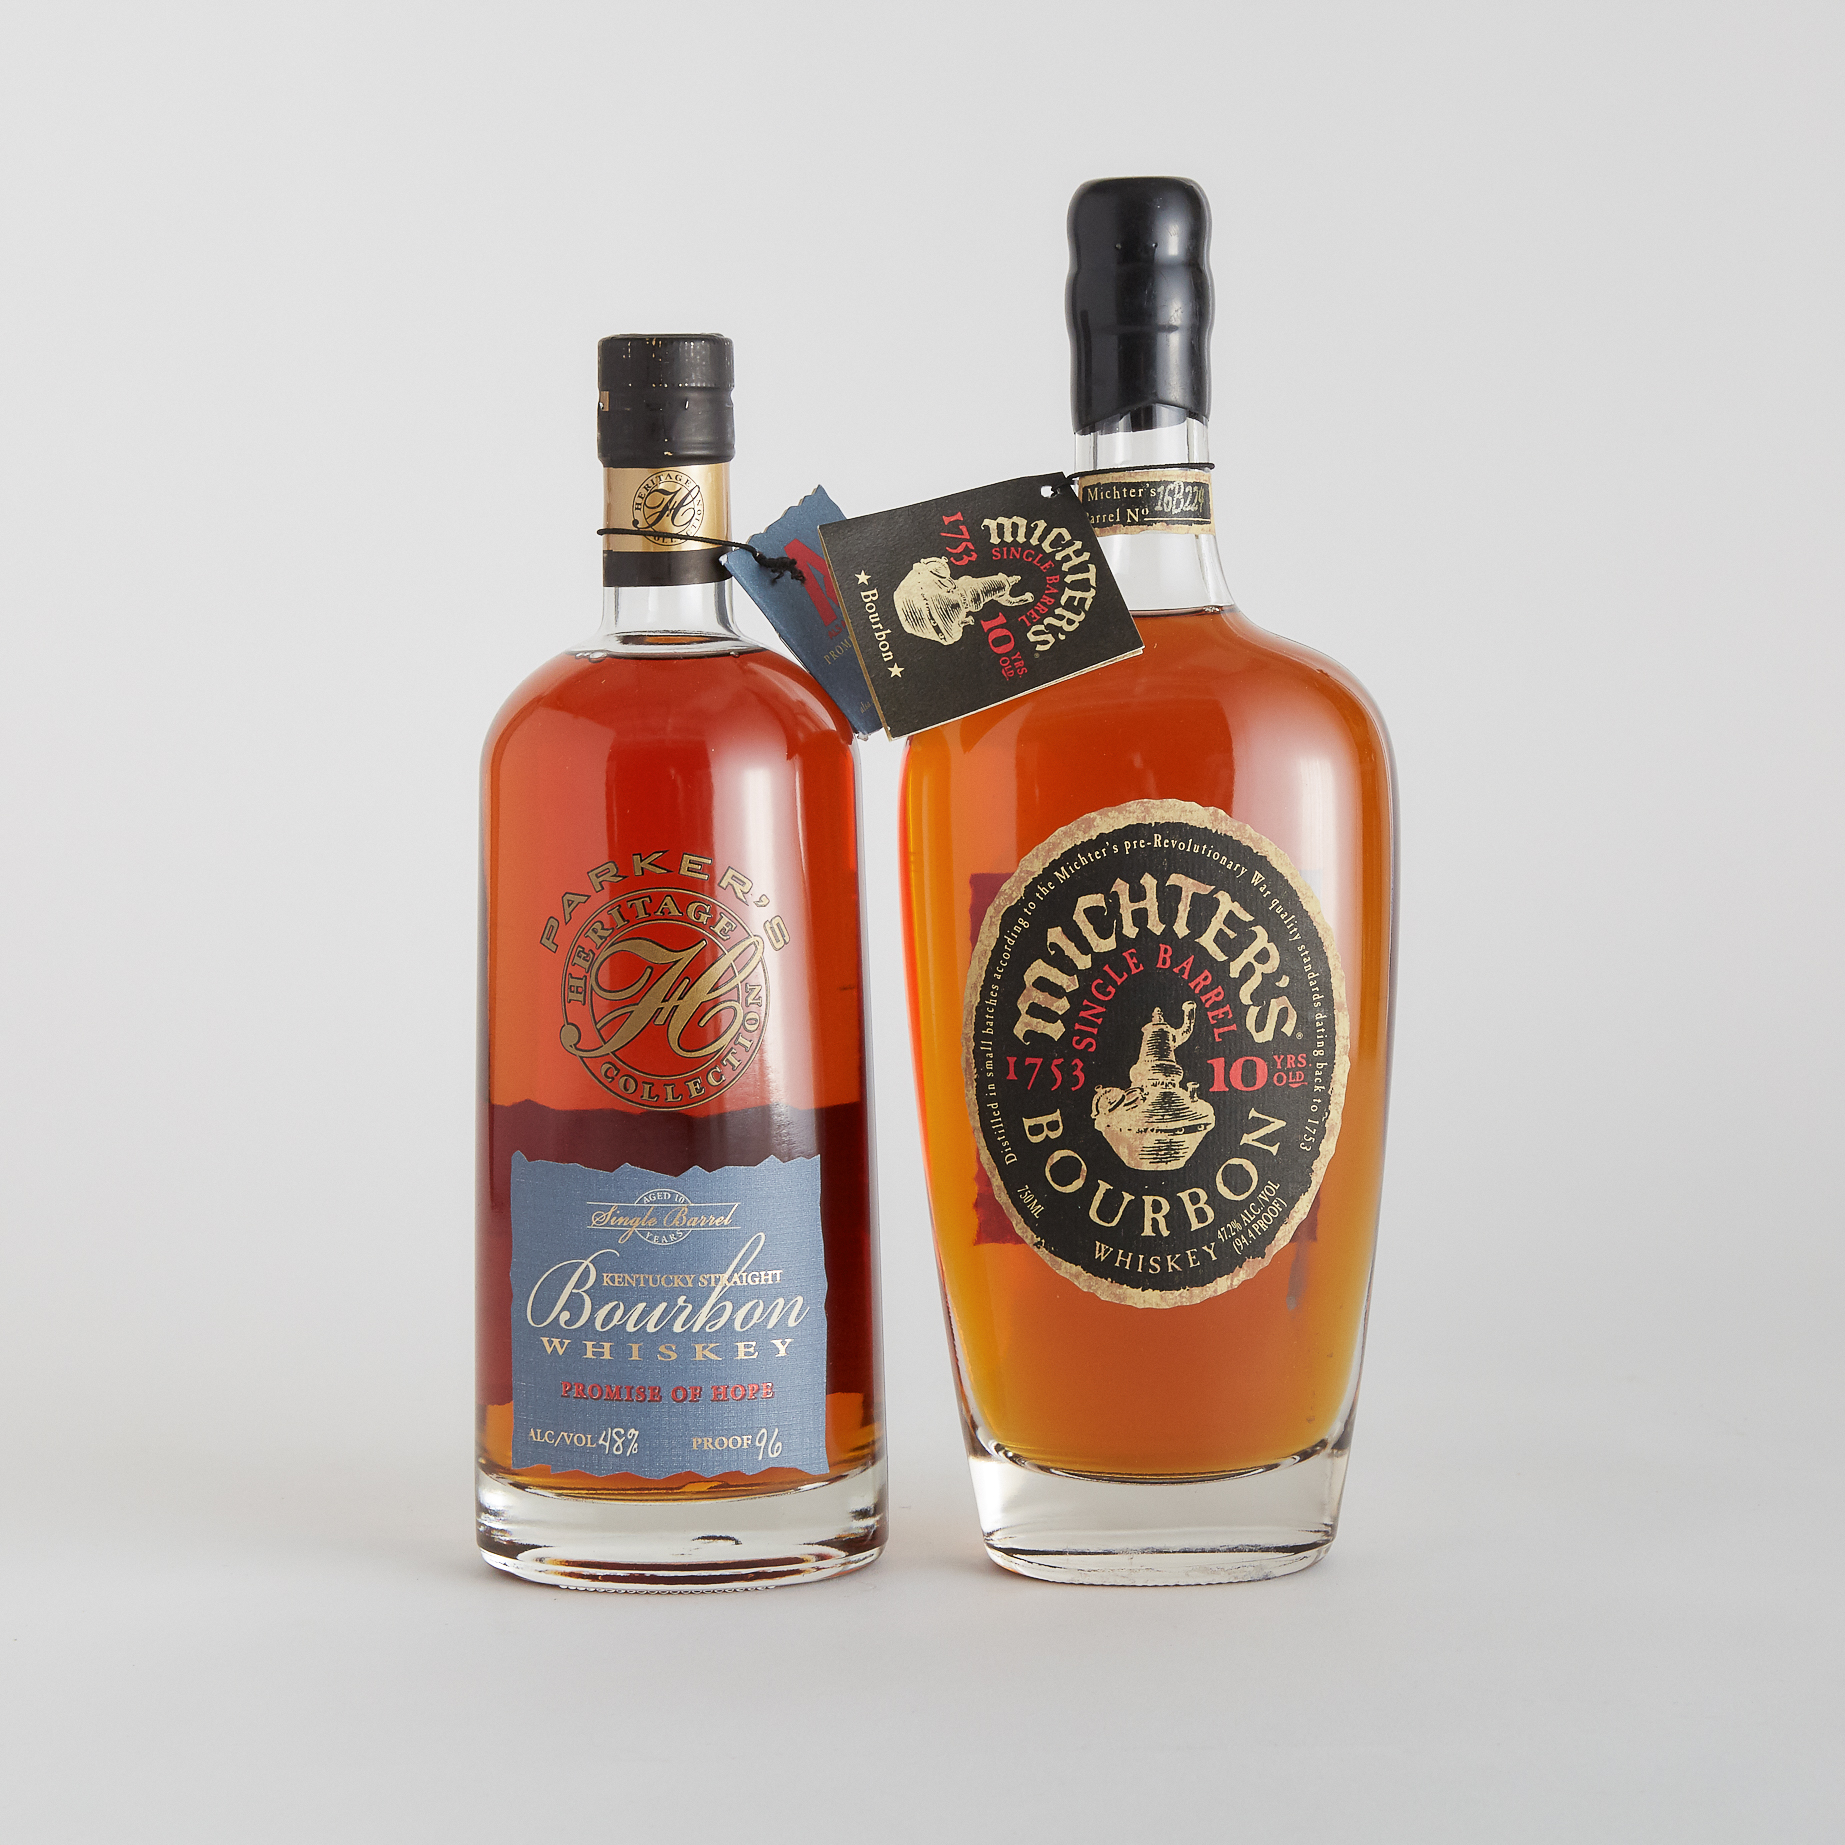 MICHTER'S SINGLE BARREL BOURBON WHISKEY 10 YEARS (ONE 750 ML)
PARKER'S HERITAGE COLLECTION PROMISE OF HOPE BOURBON WHISKEY 10 YEARS (ONE 750 ML)